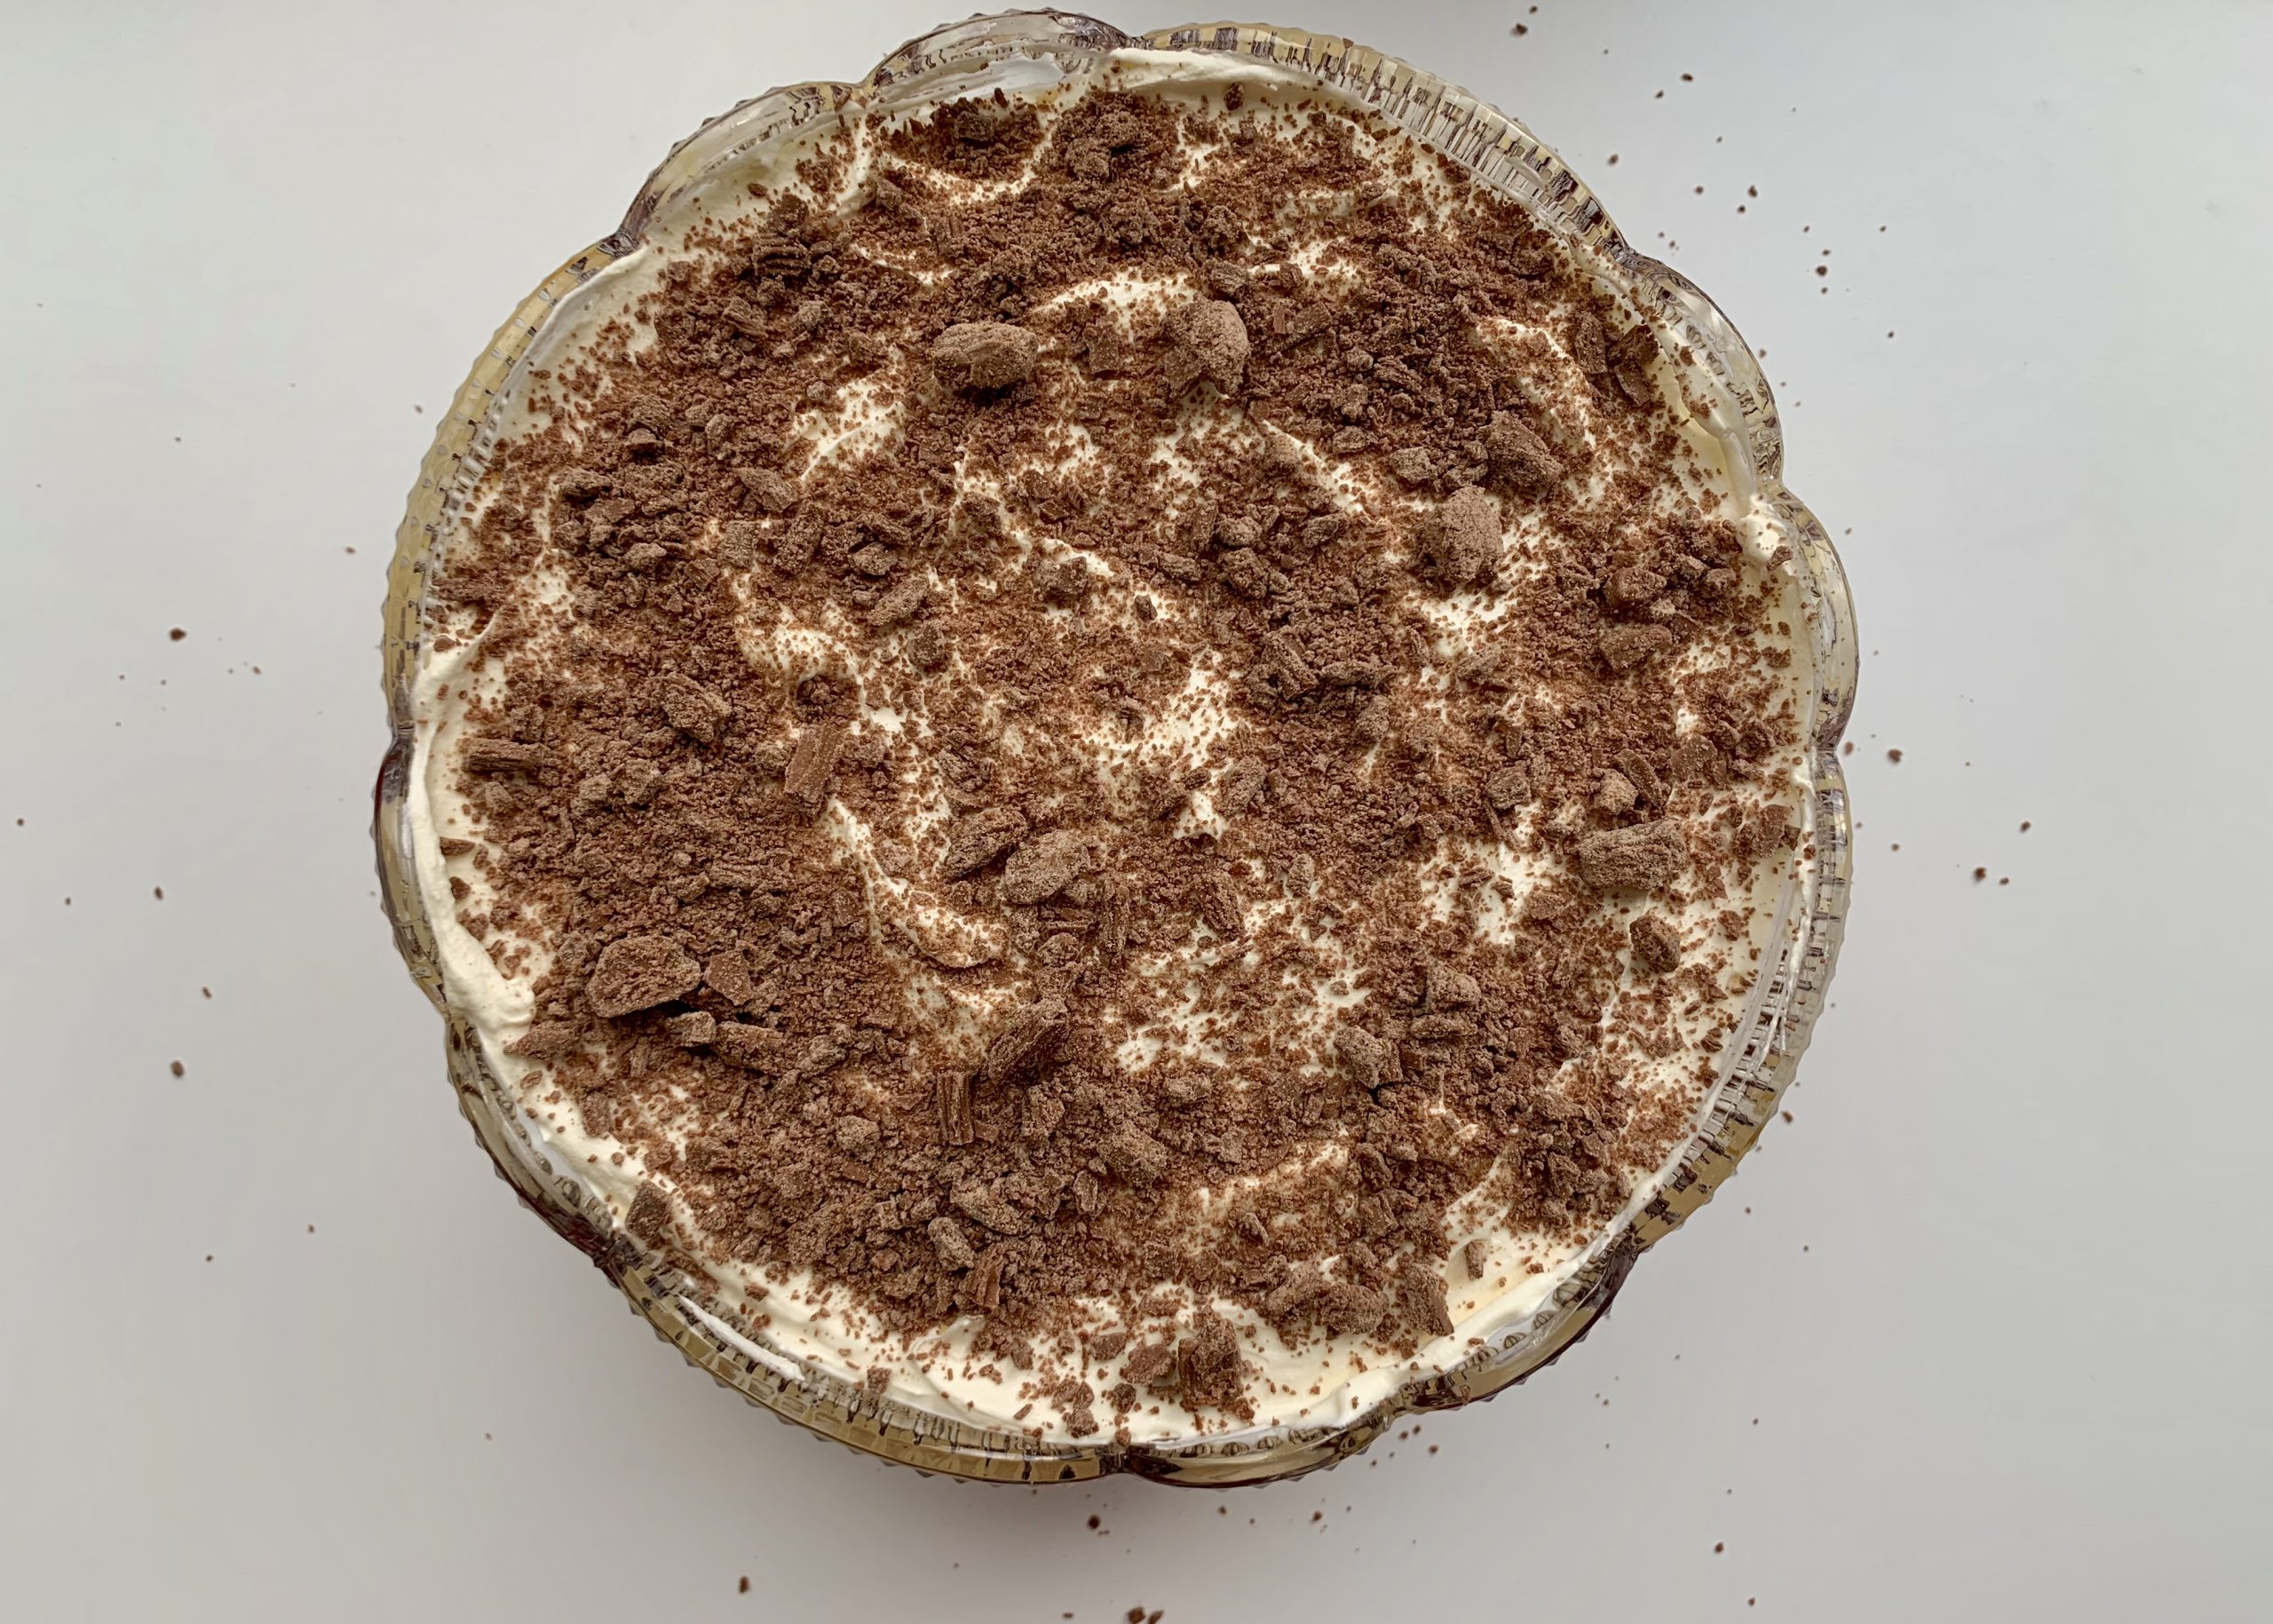 Gluten free trifle topped with crumbled chocolate